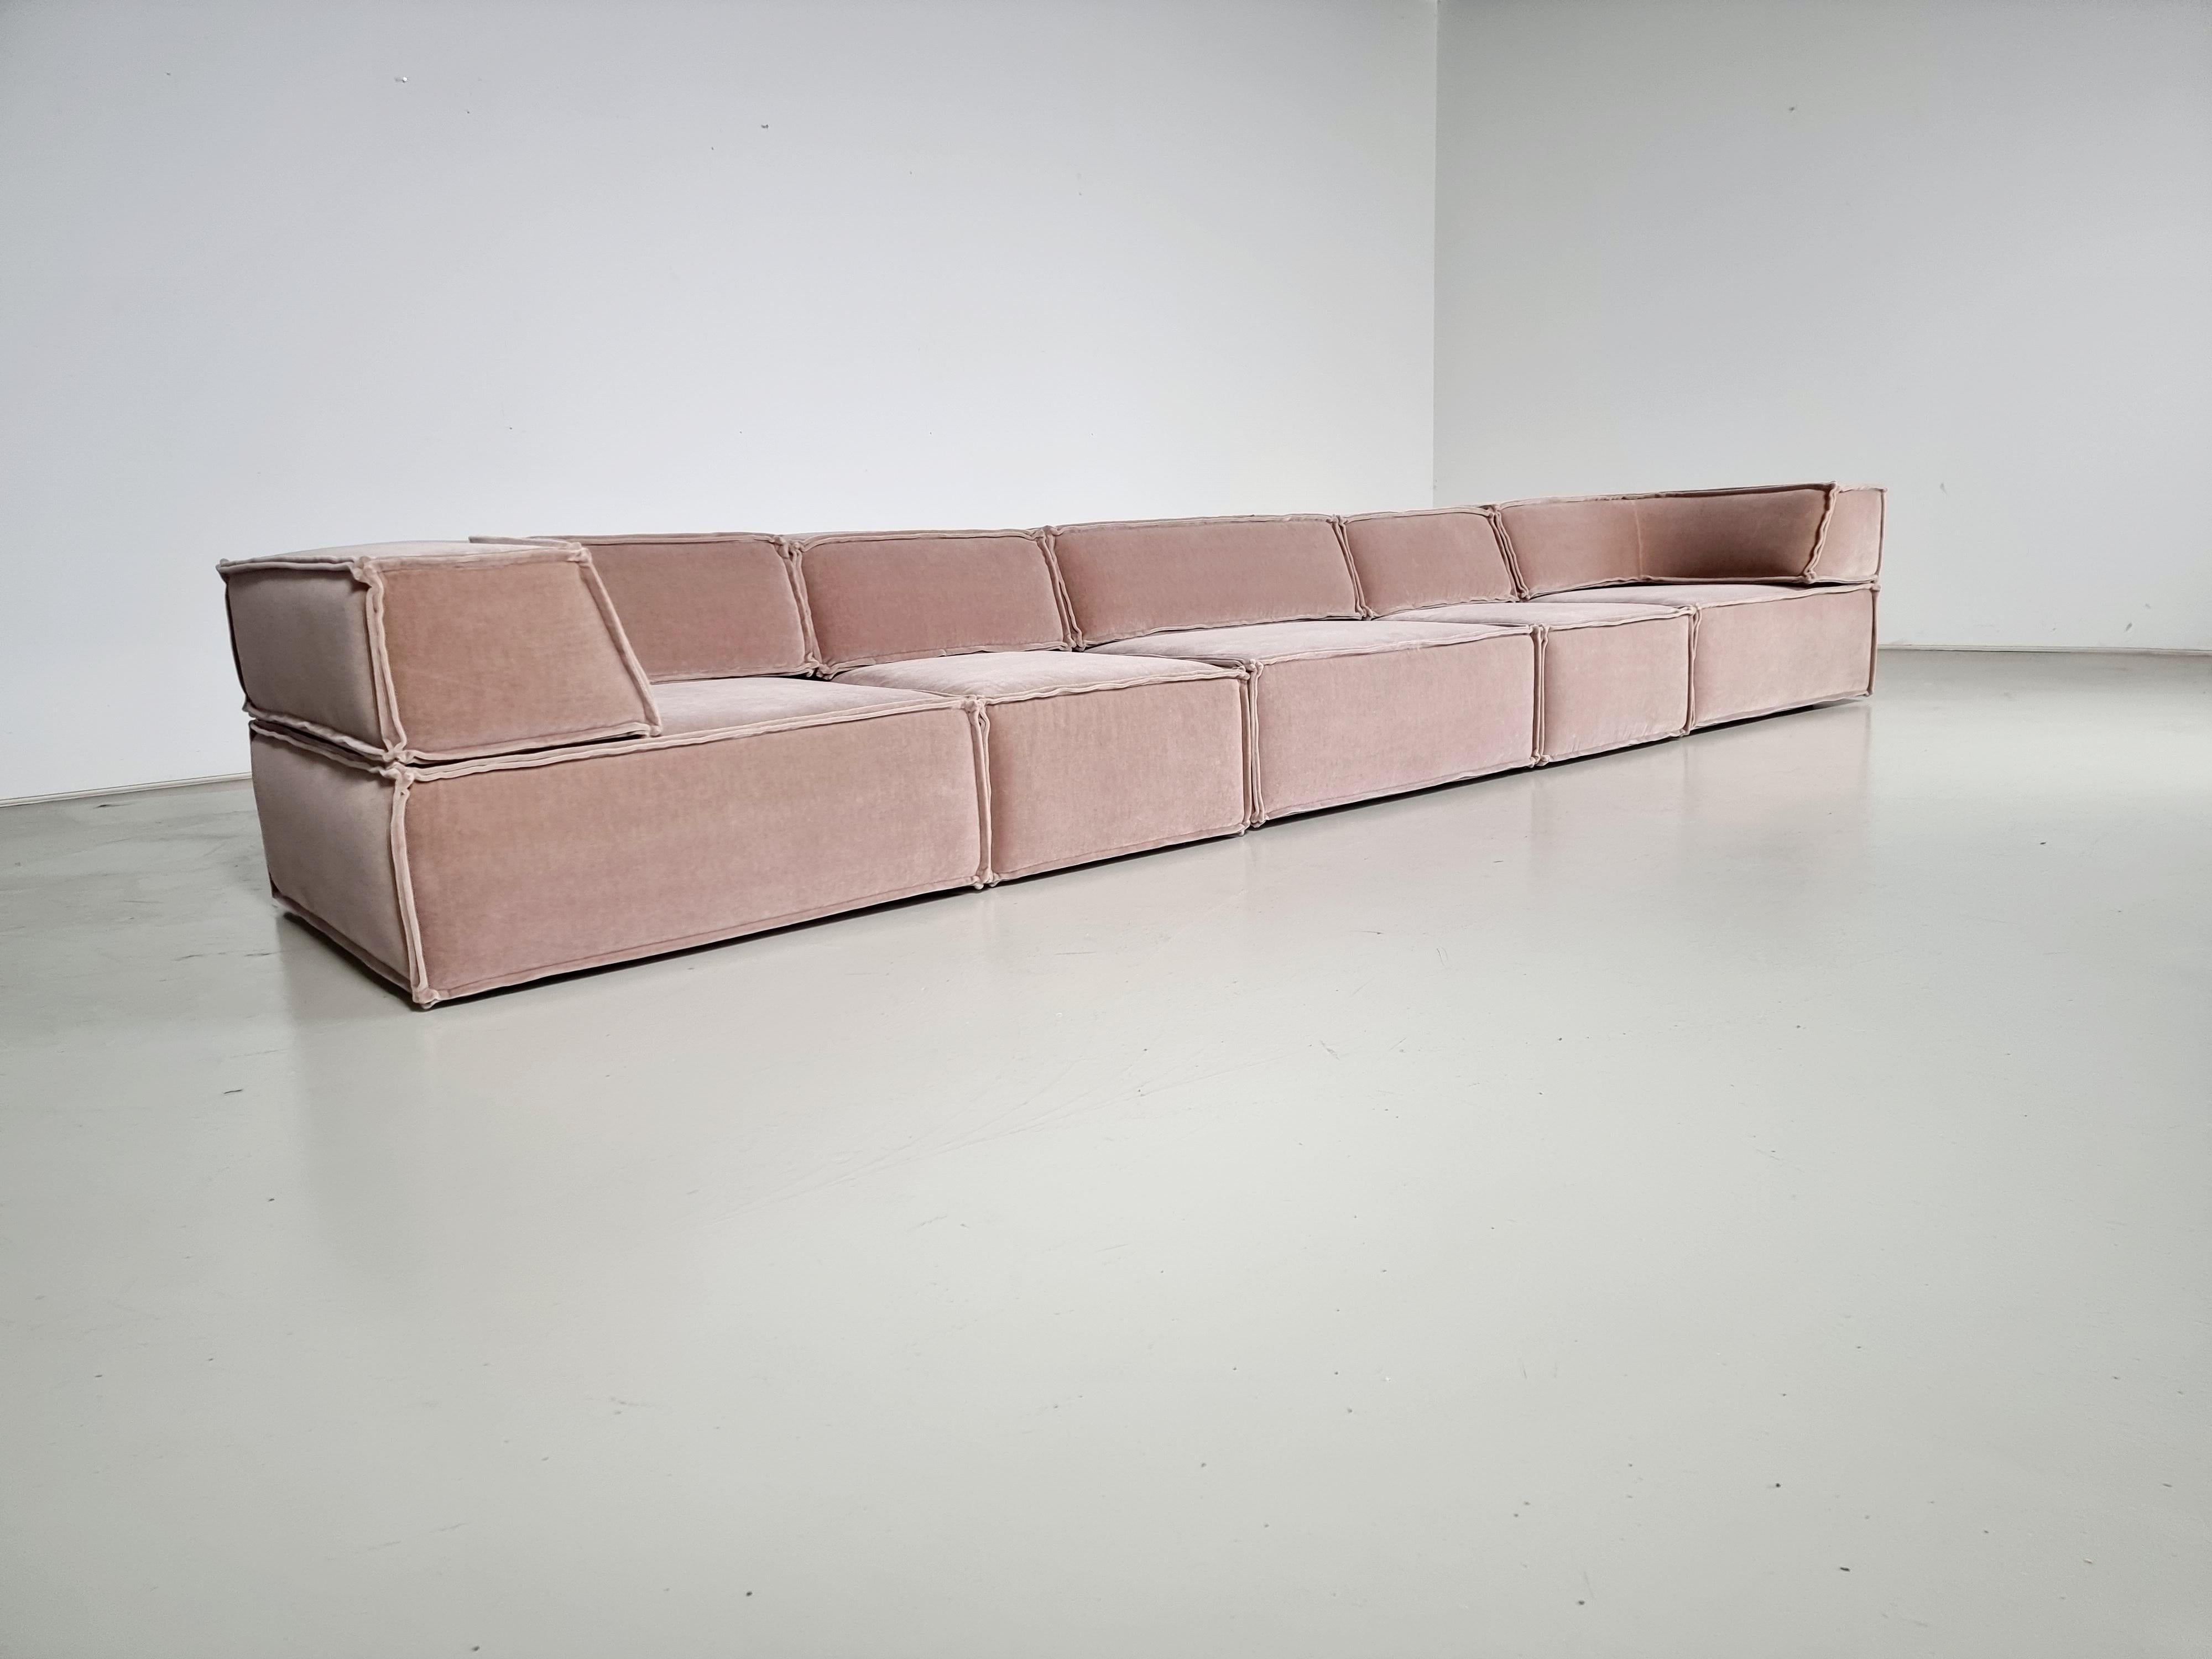 Mohair COR Trio Sofa by Team Form Ag for COR Furniture, Germany, 1970s For Sale